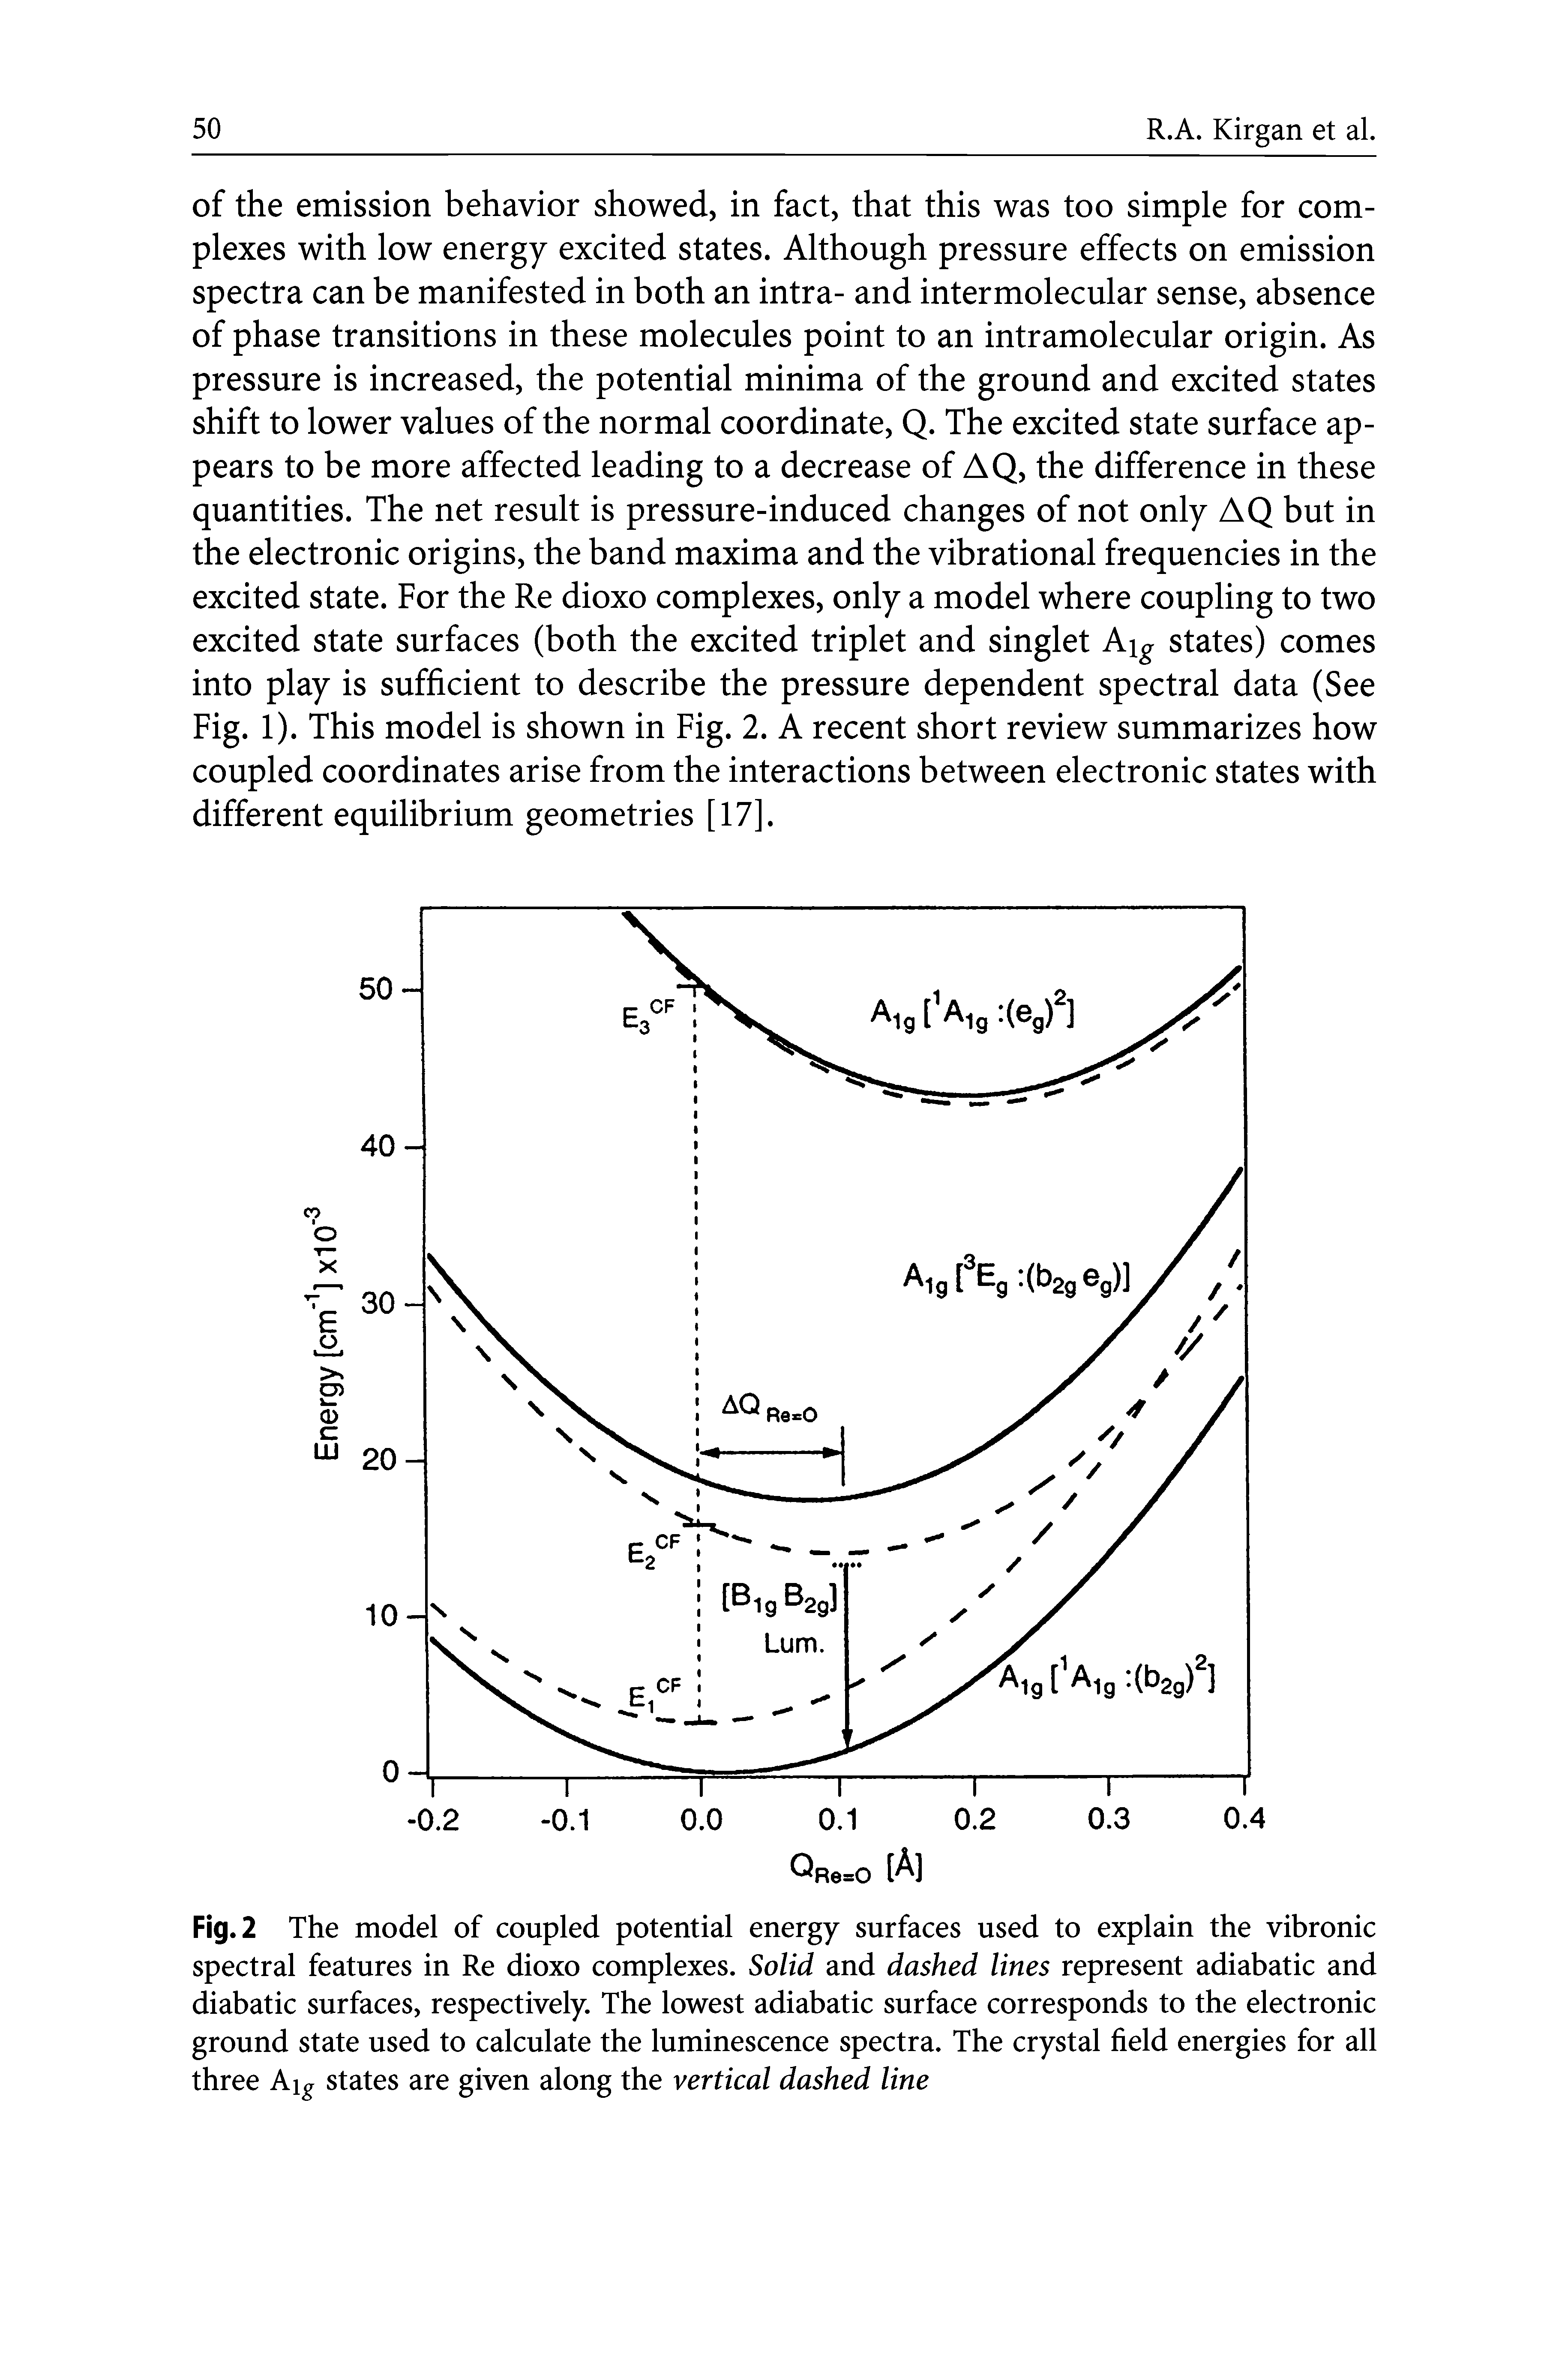 Fig. 2 The model of coupled potential energy surfaces used to explain the vibronic spectral features in Re dioxo complexes. Solid and dashed lines represent adiabatic and diabatic surfaces, respectively. The lowest adiabatic surface corresponds to the electronic ground state used to calculate the luminescence spectra. The crystal field energies for all three Ai states are given along the vertical dashed line...